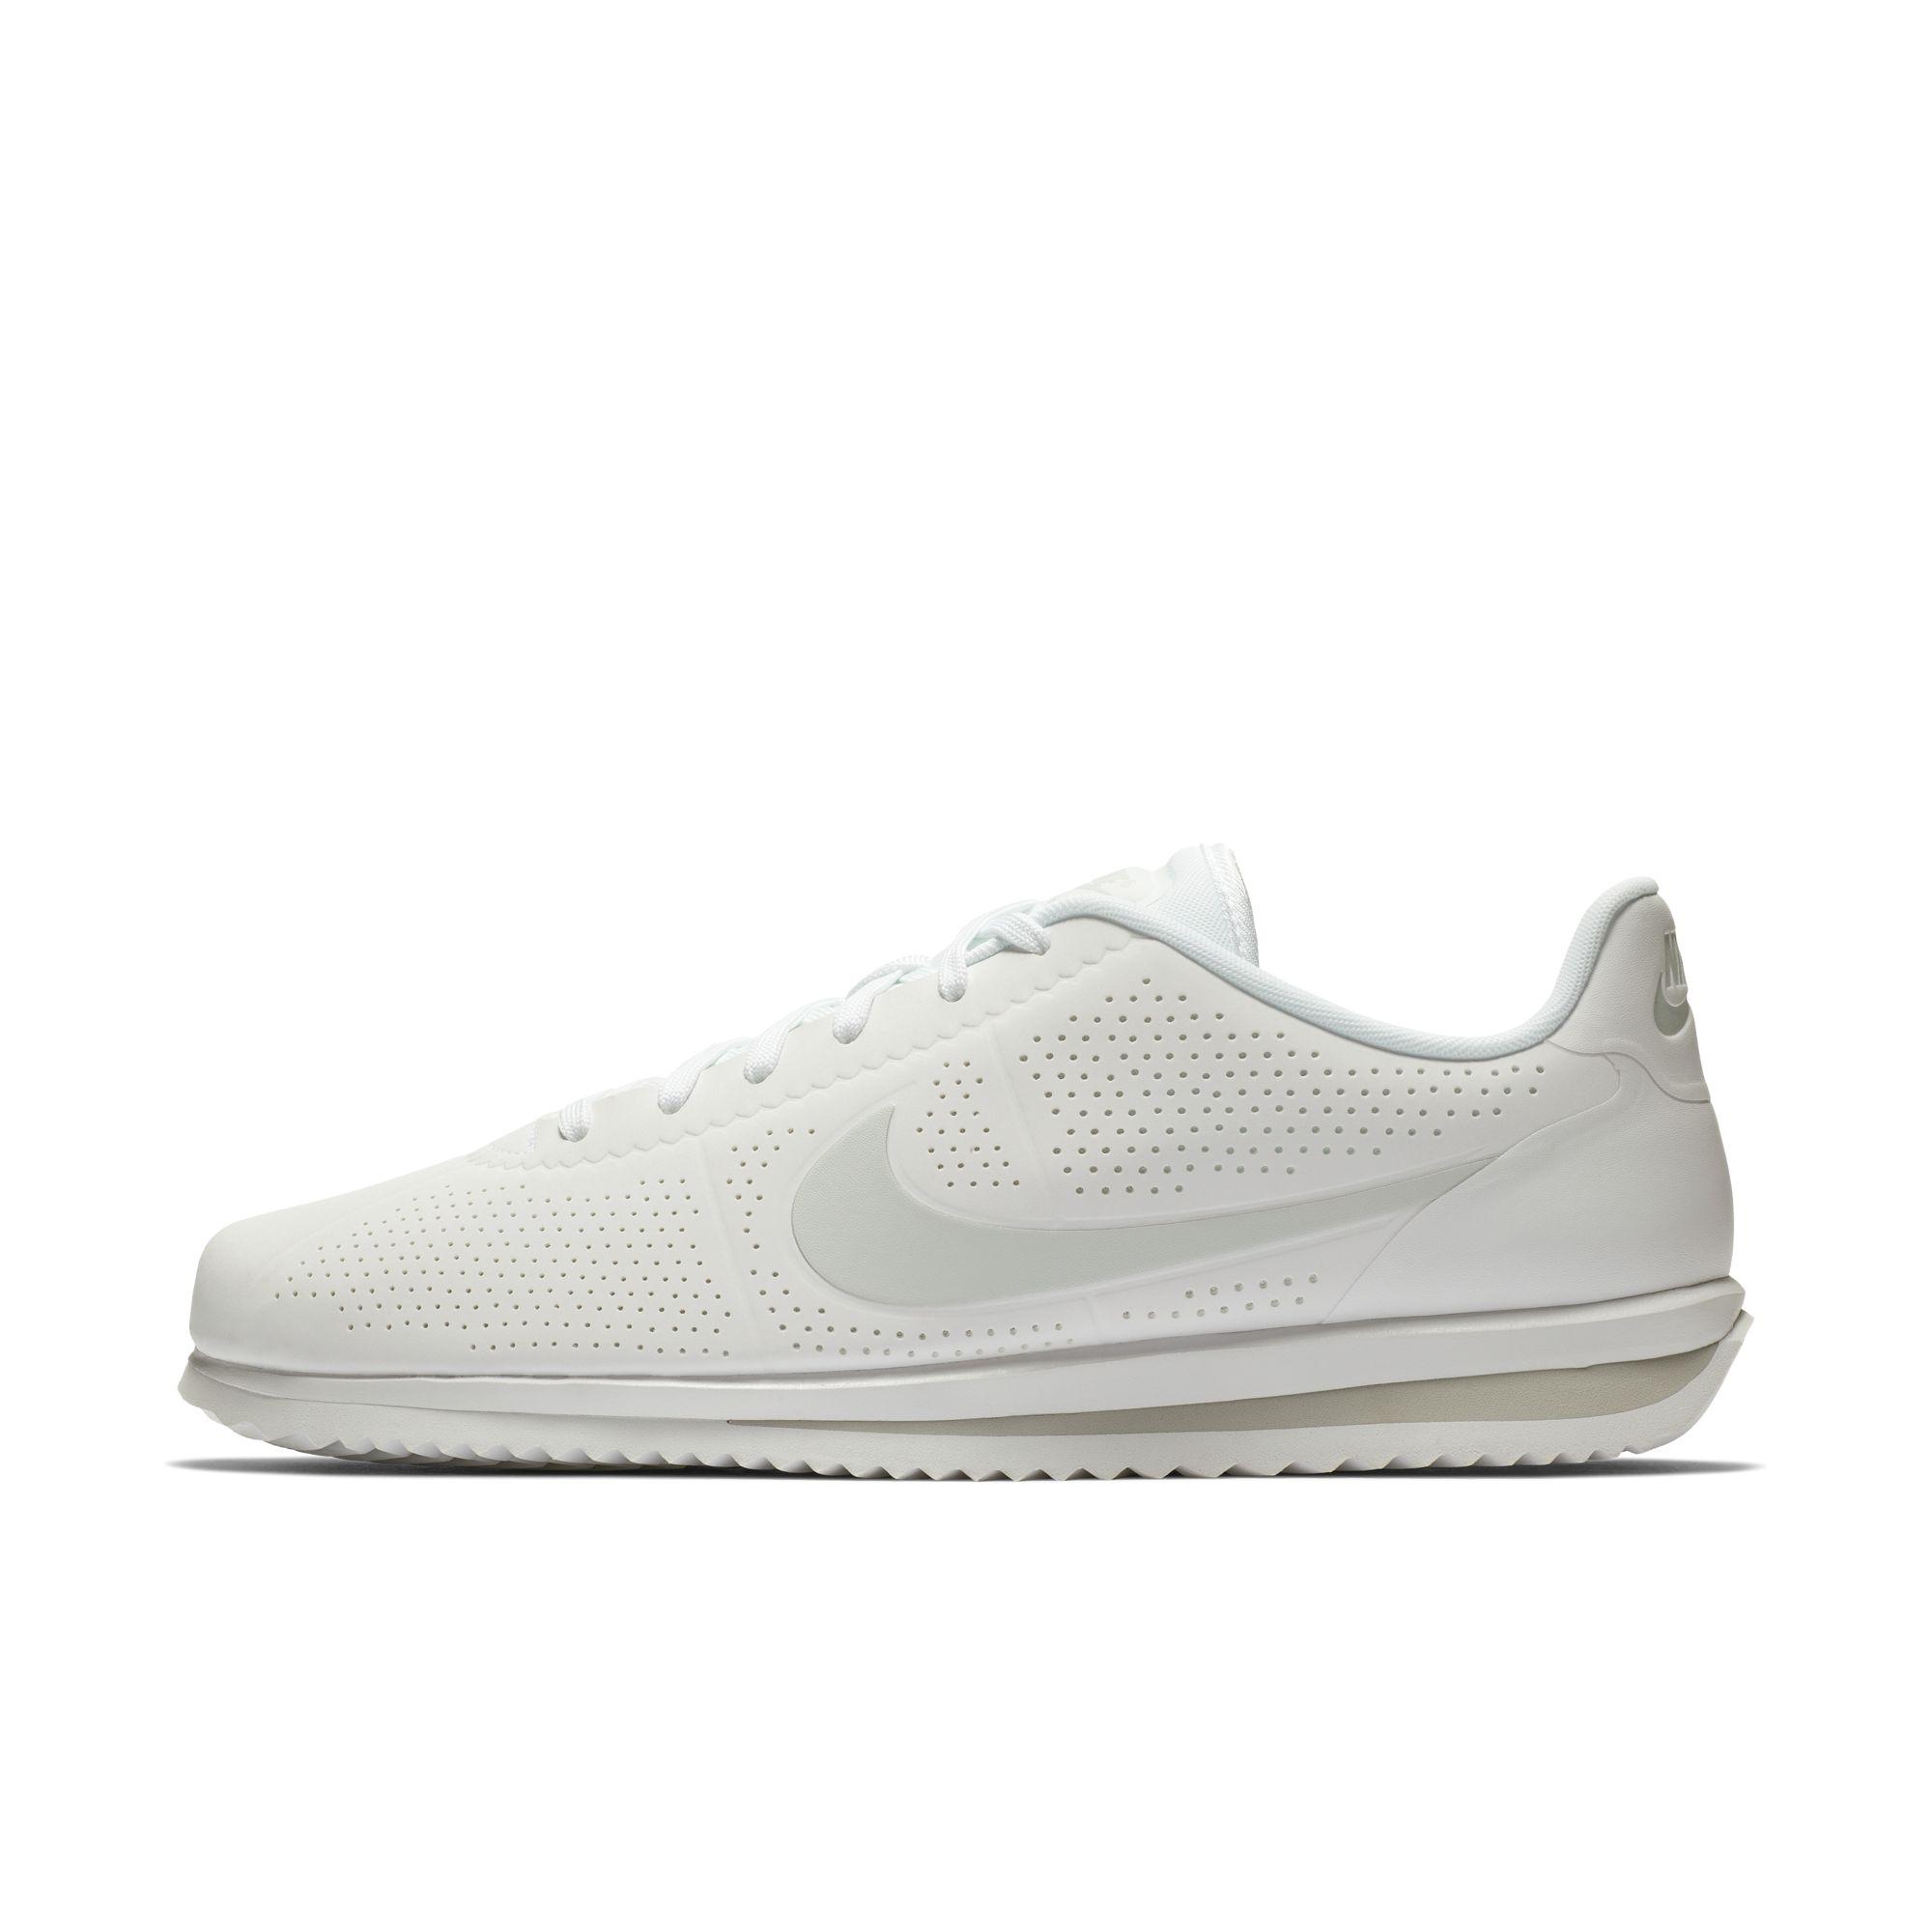 Nike Cortez Moire White Italy, SAVE 37% - aveclumiere.com